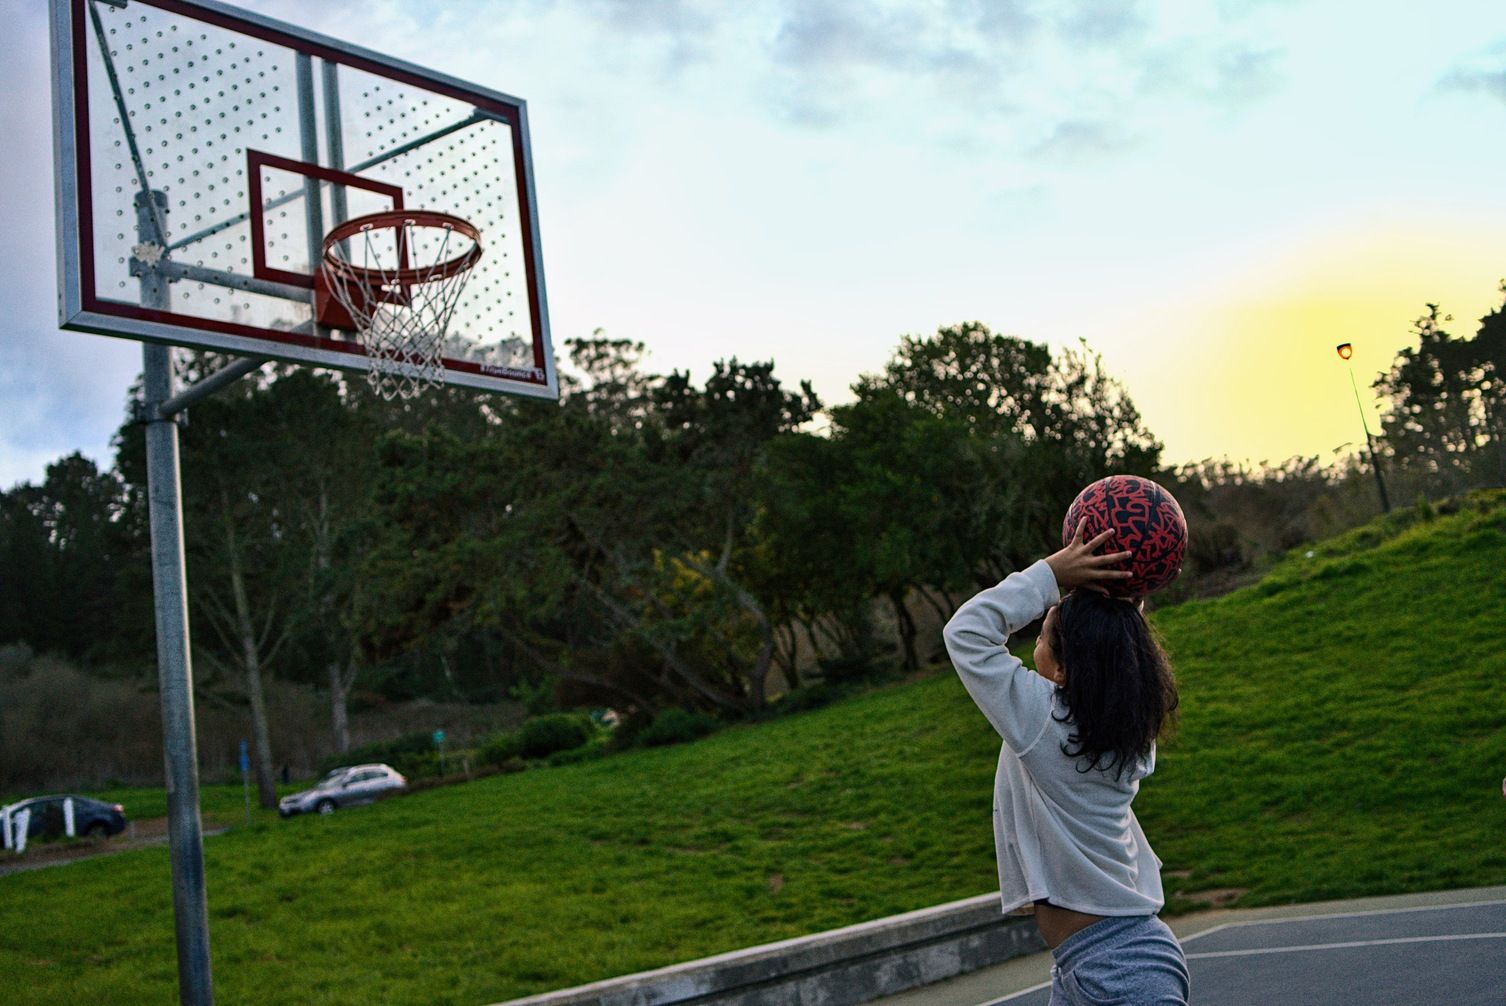 First Basketball Shot of Civil Twilight at McLaren Park courts on Sony a7ii | f/4.0 | 35 mm | ISO 1000